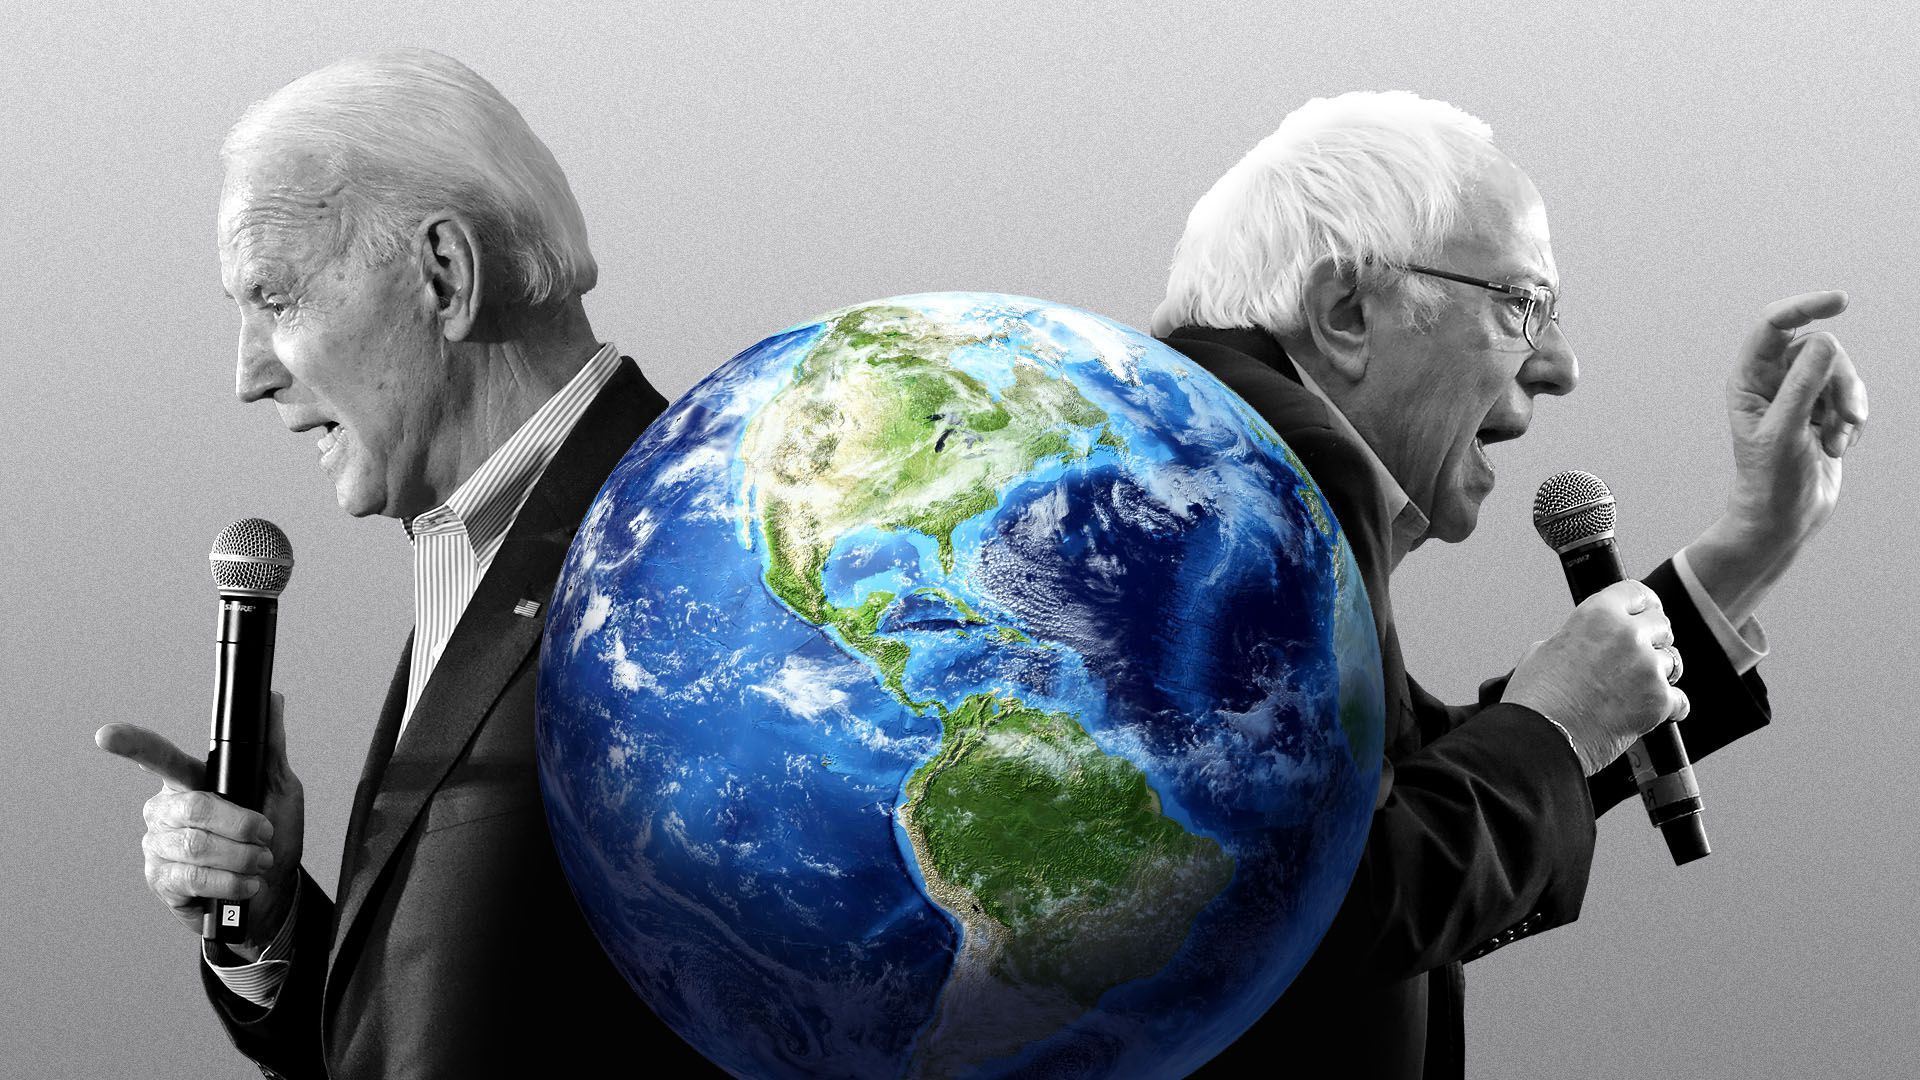 Photo illustration of Joseph Biden and Bernie Sanders in profile with the globe between them